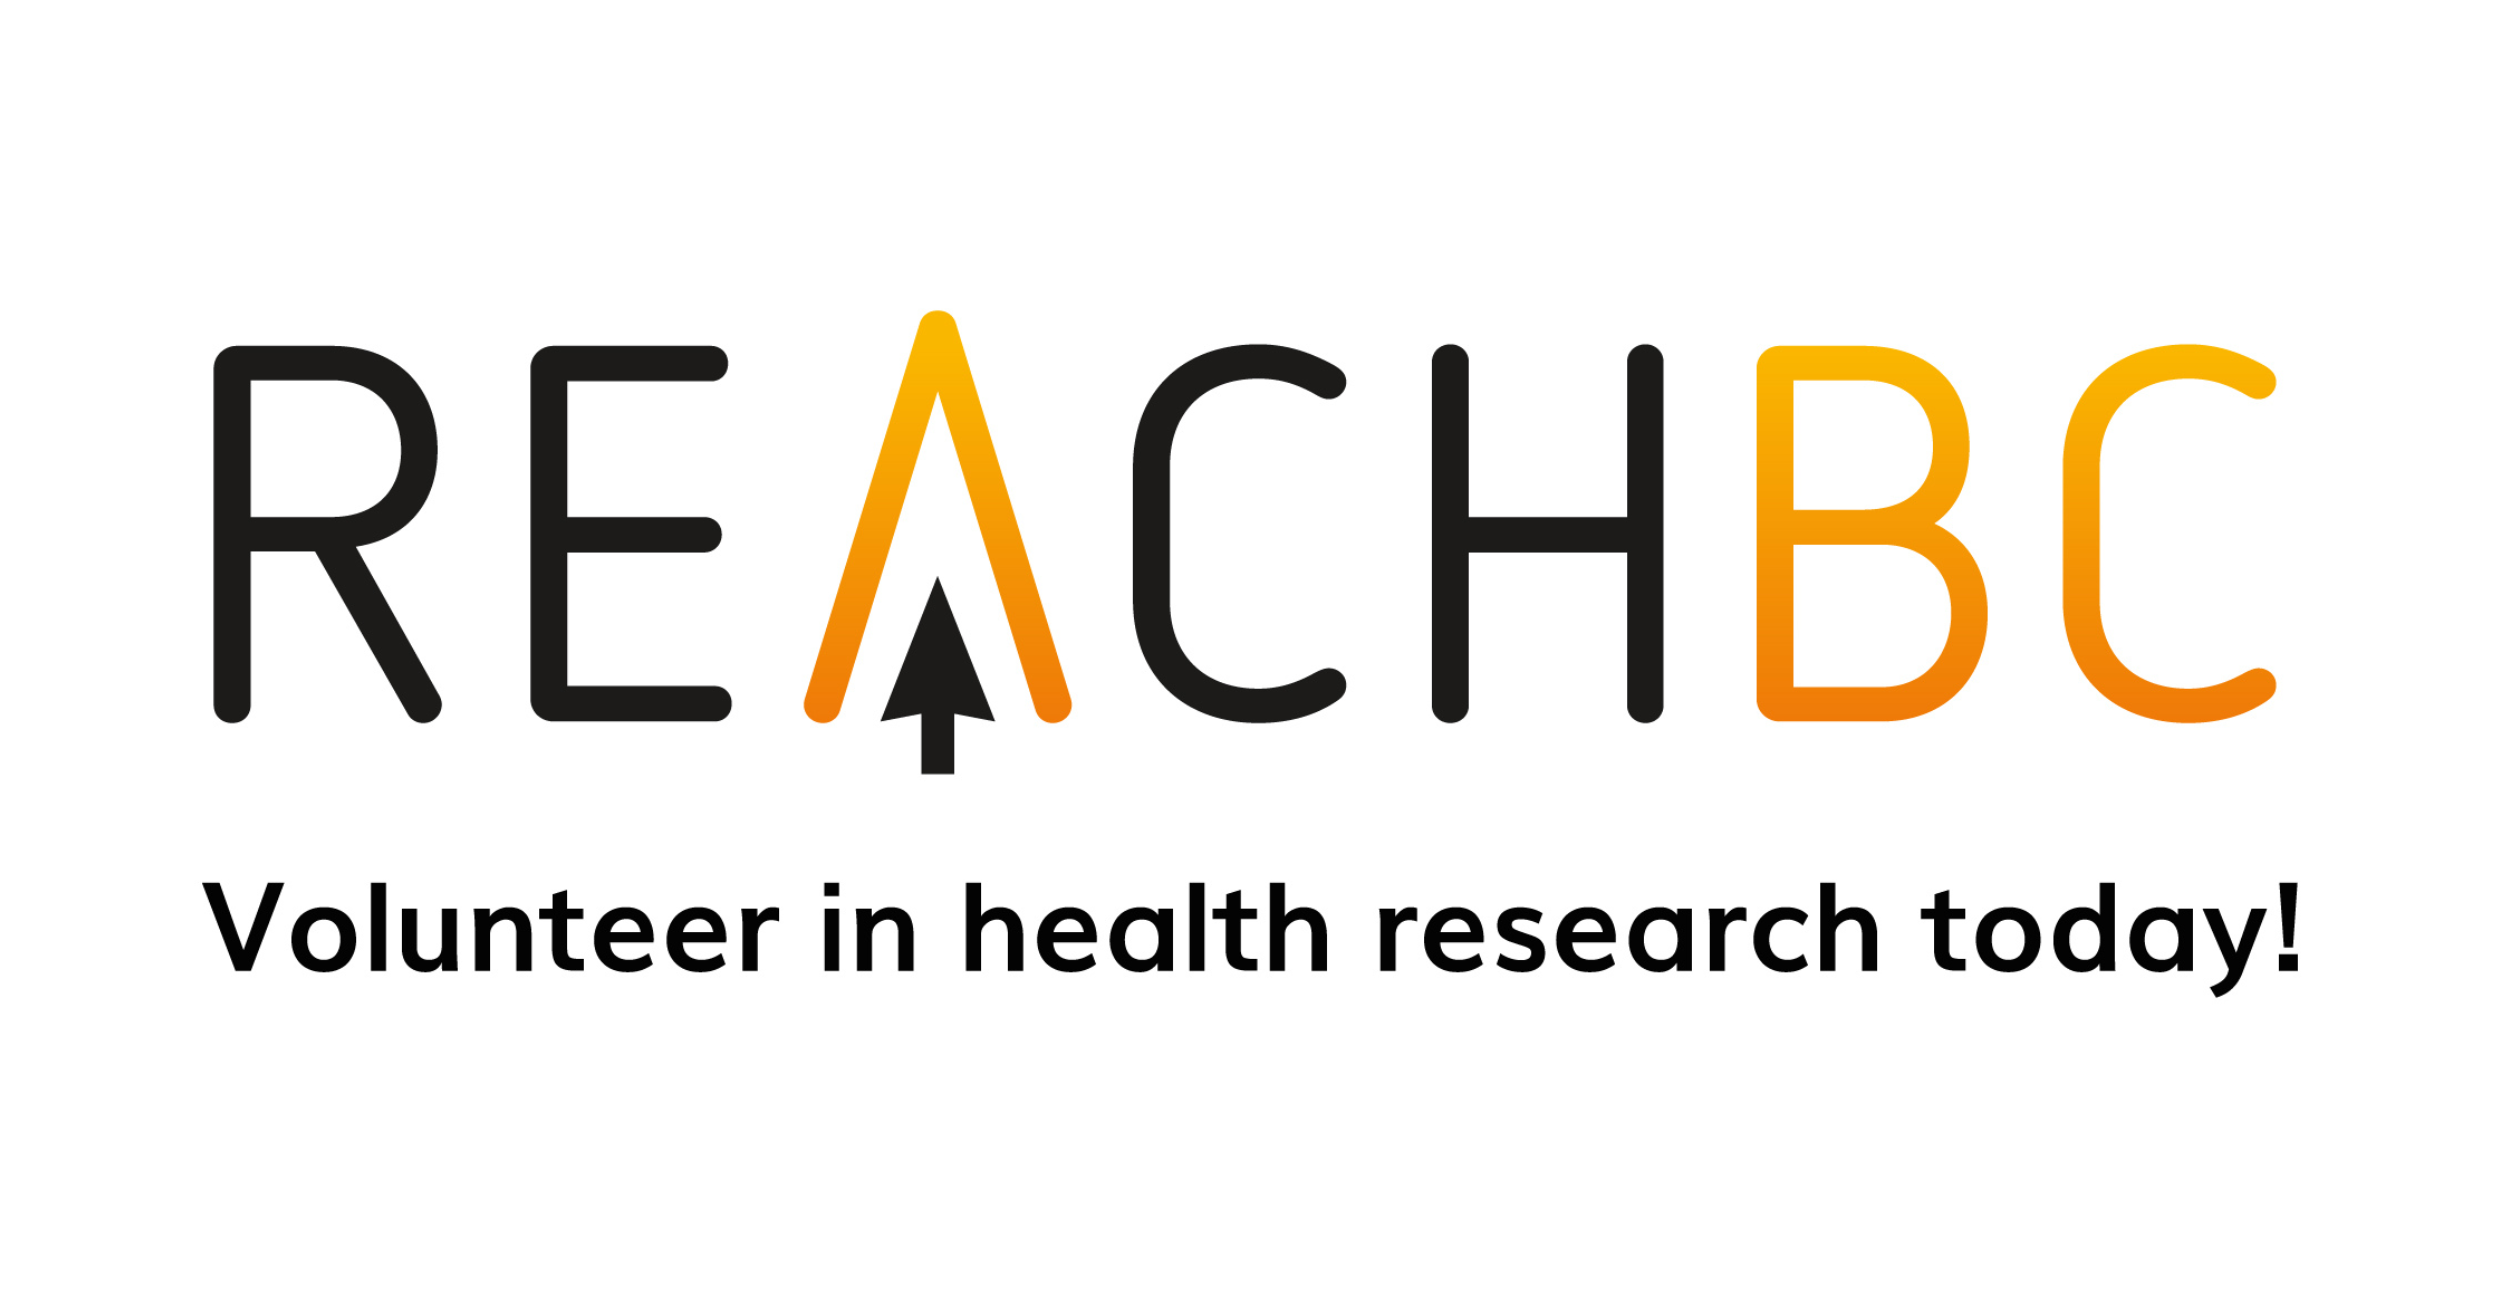 Share your study results with the public on REACH BC